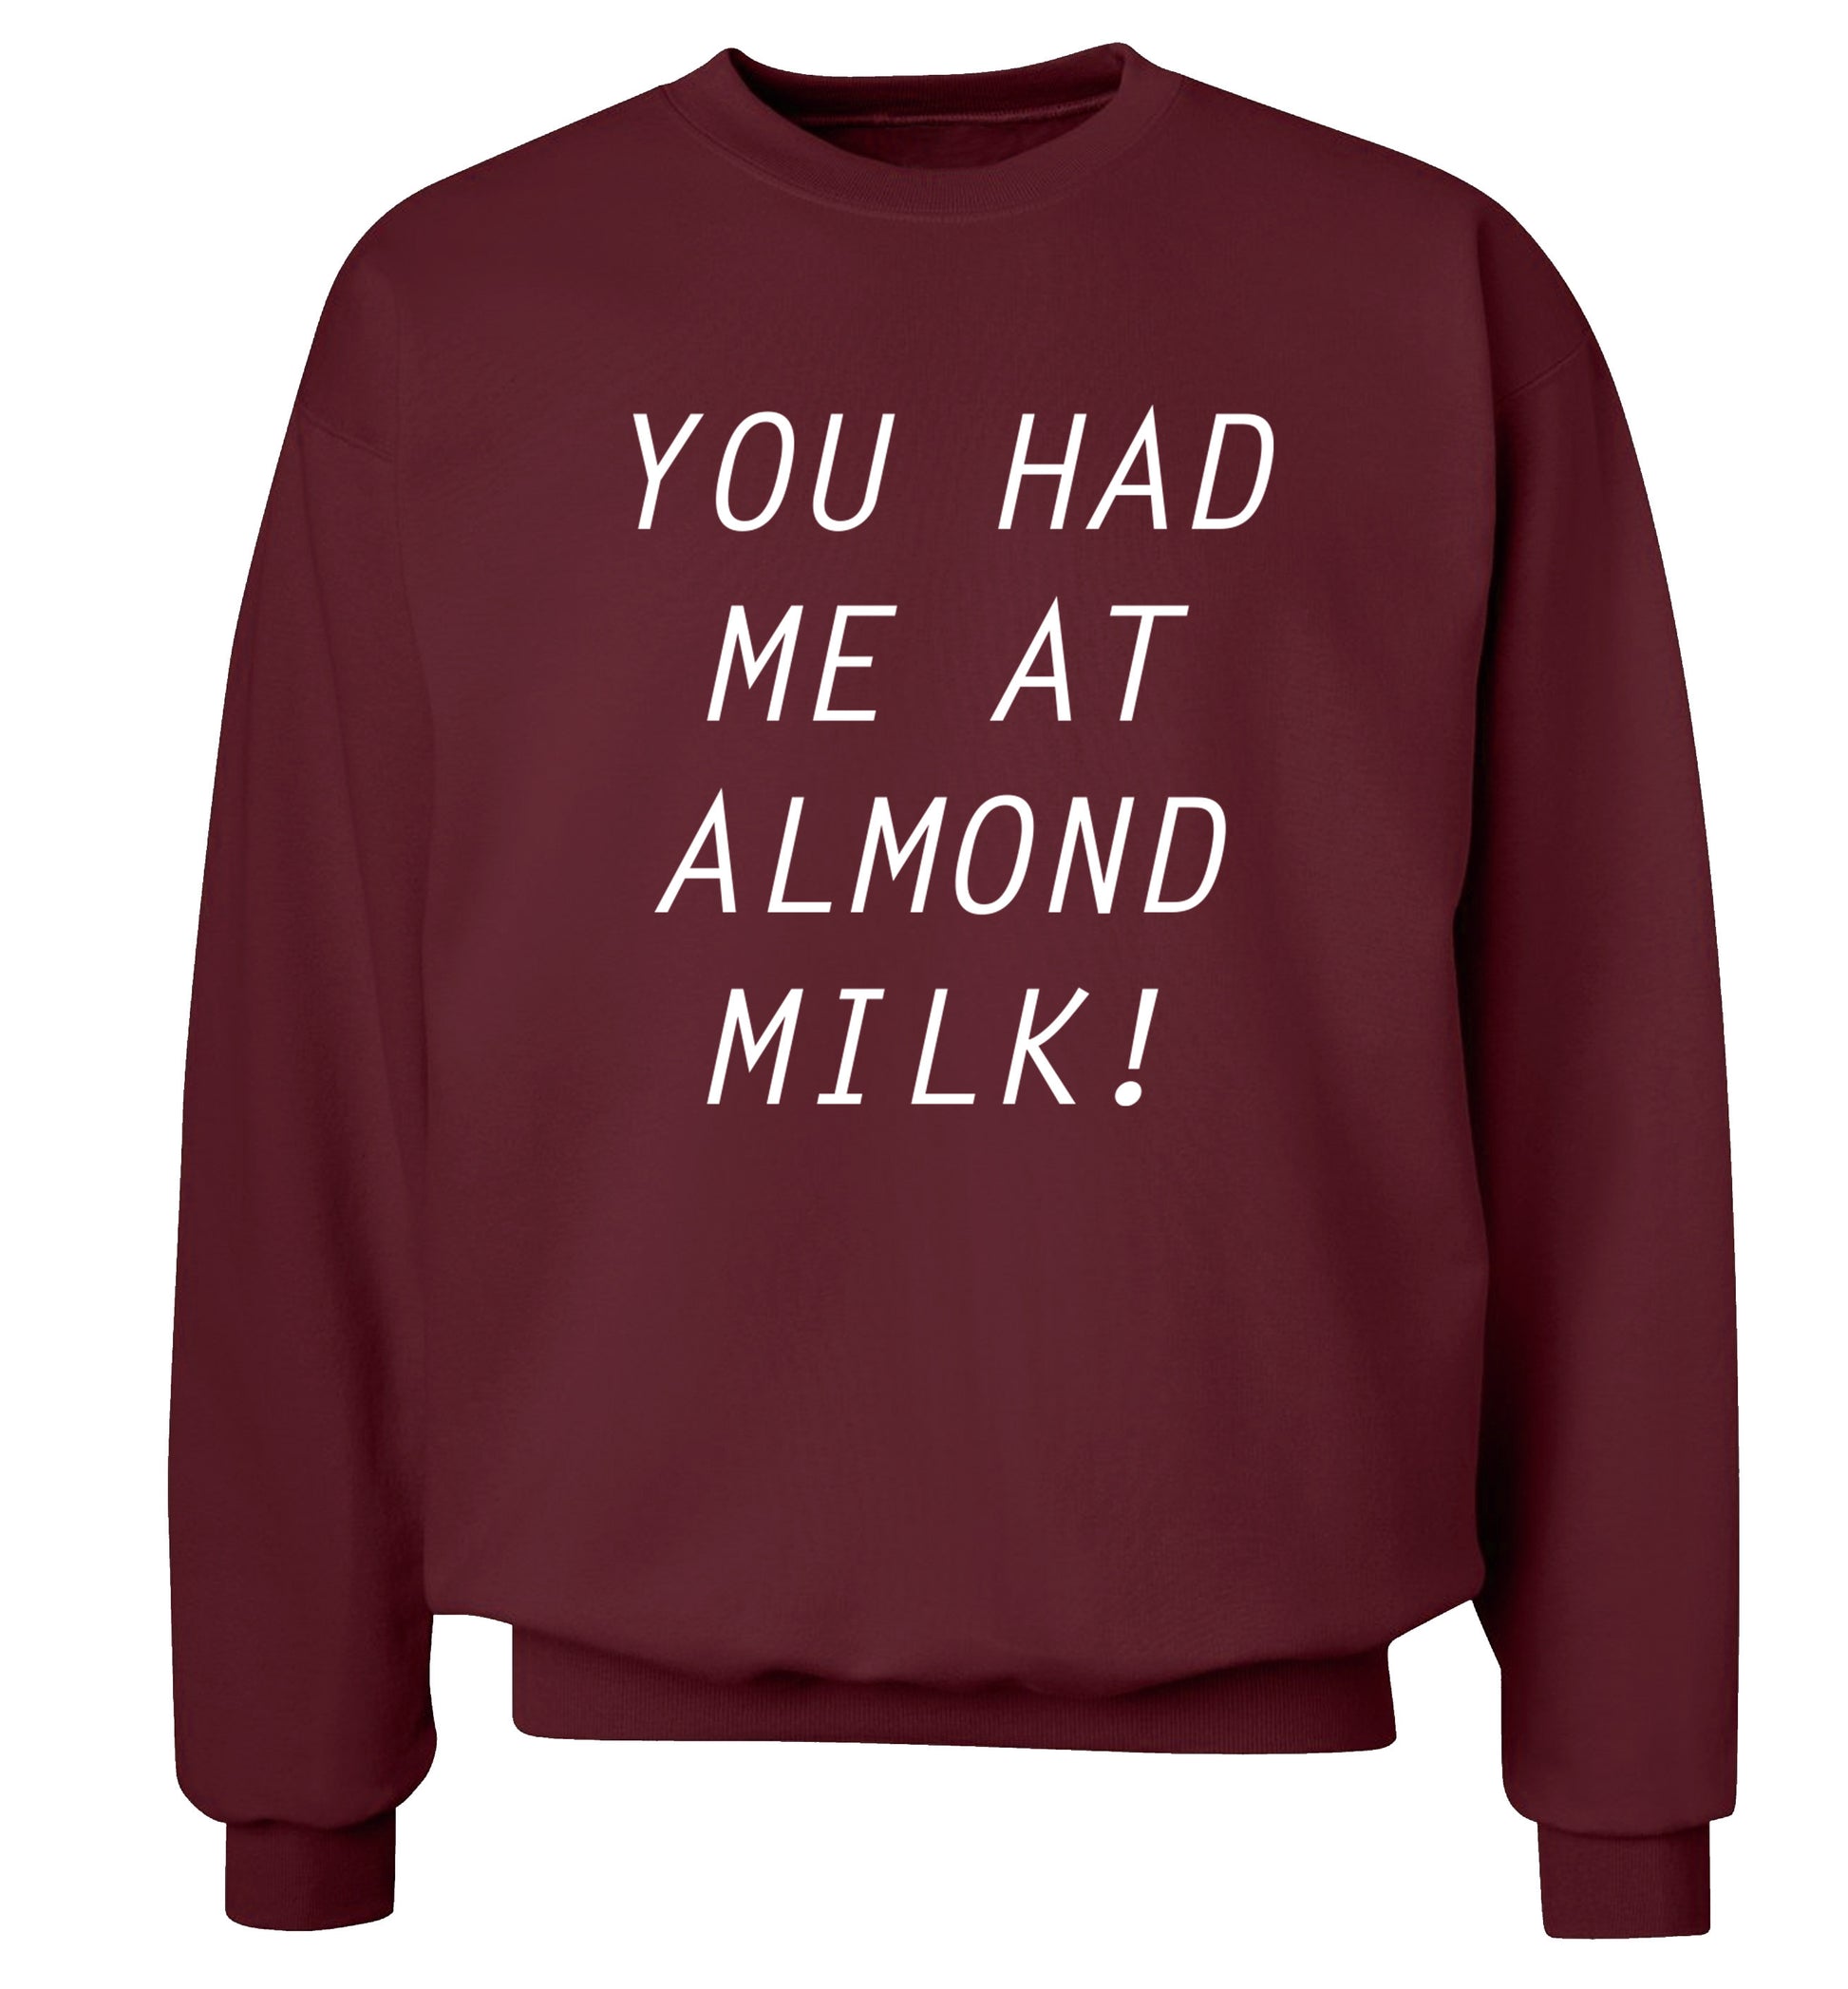 You had me at almond milk Adult's unisex maroon Sweater 2XL